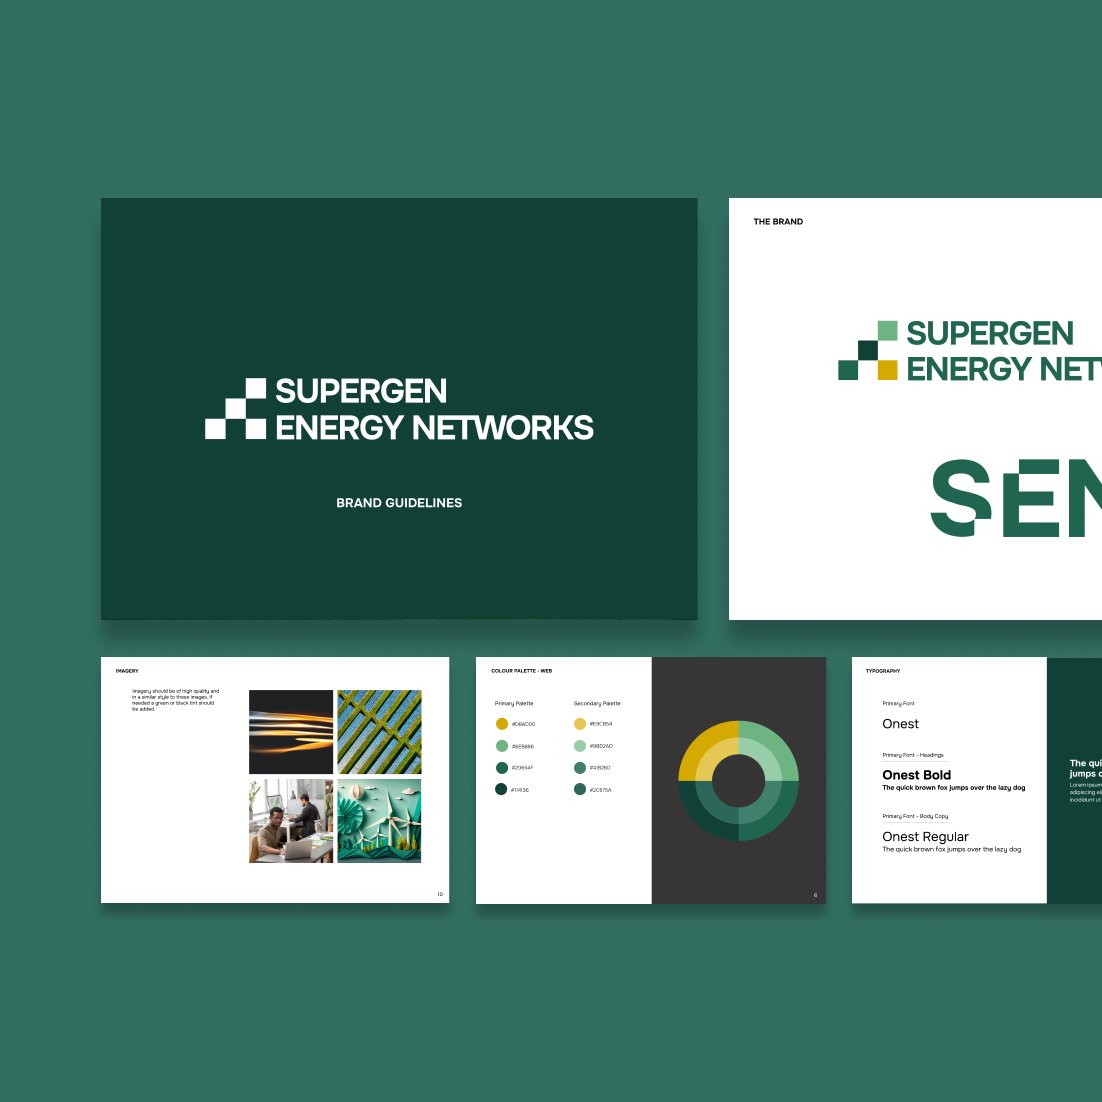 Your brand is the visual identity which connects your customers with the personality and values of your company – so it’s vital that you get it right.

When was the last time you looked at your #brandguidelines?

Here's what we have created for @SENHub1 💚